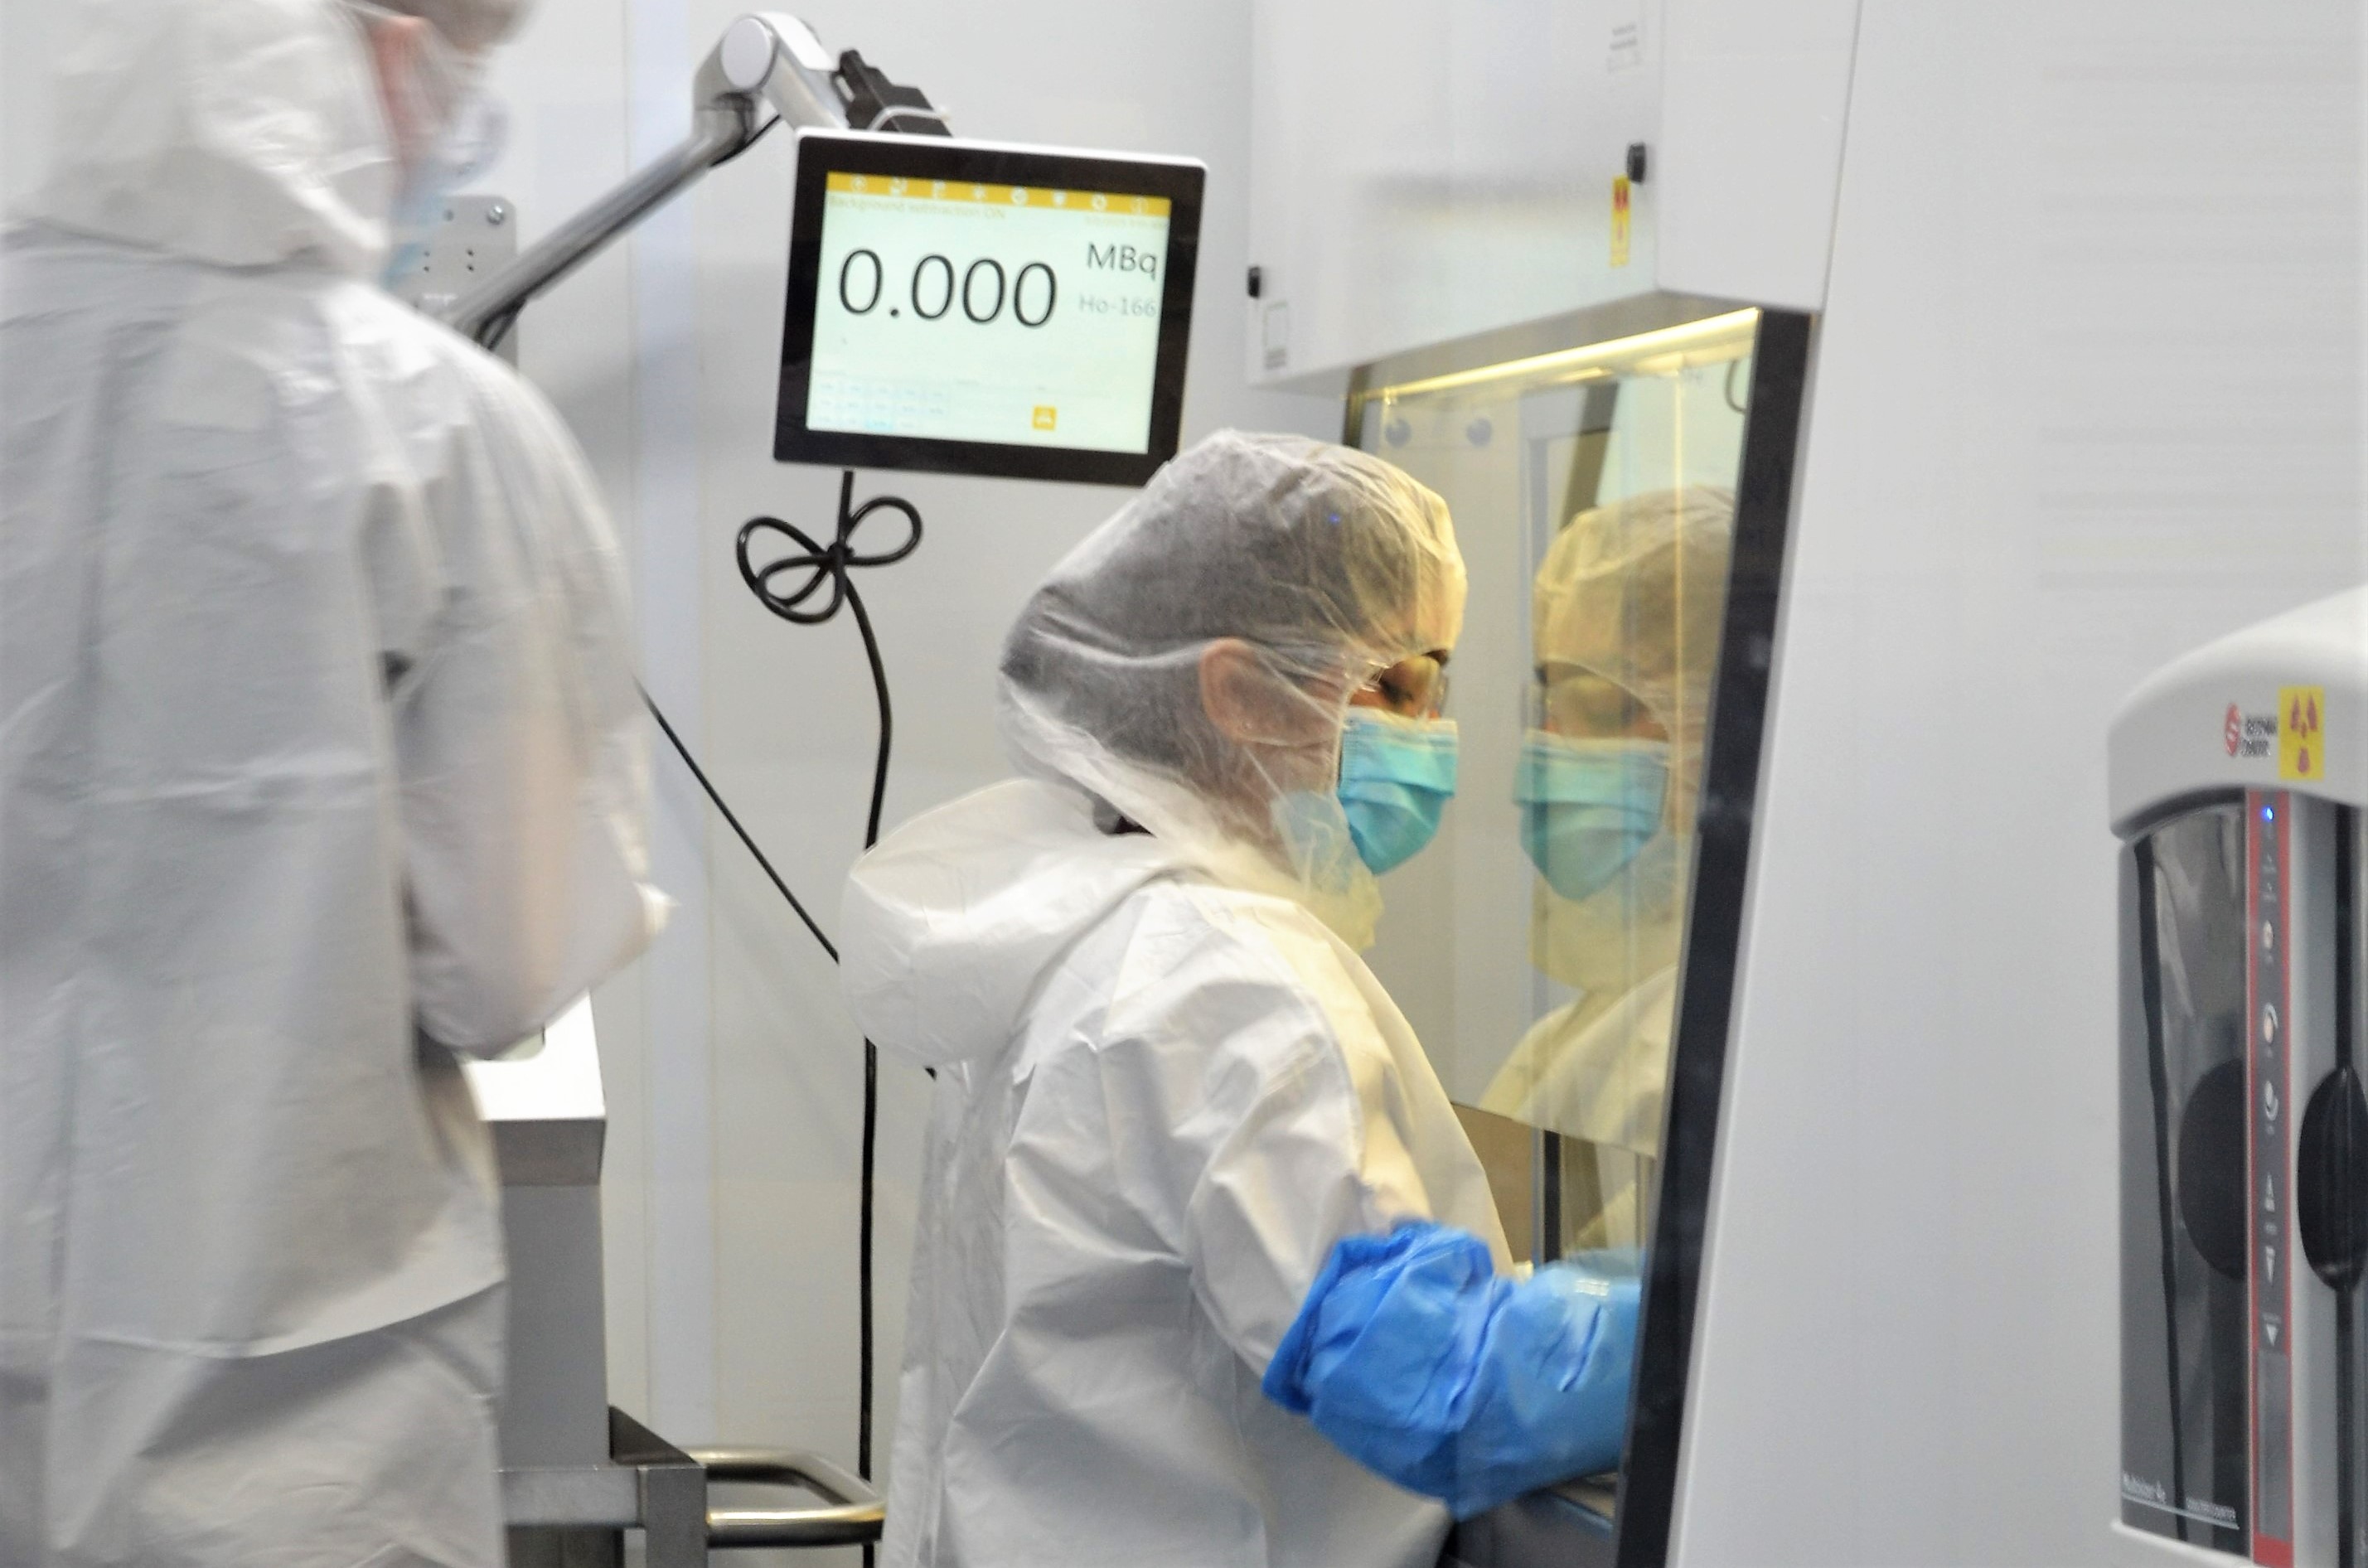 A technician wearing PPE dispenses a medical isotope inside a lab.